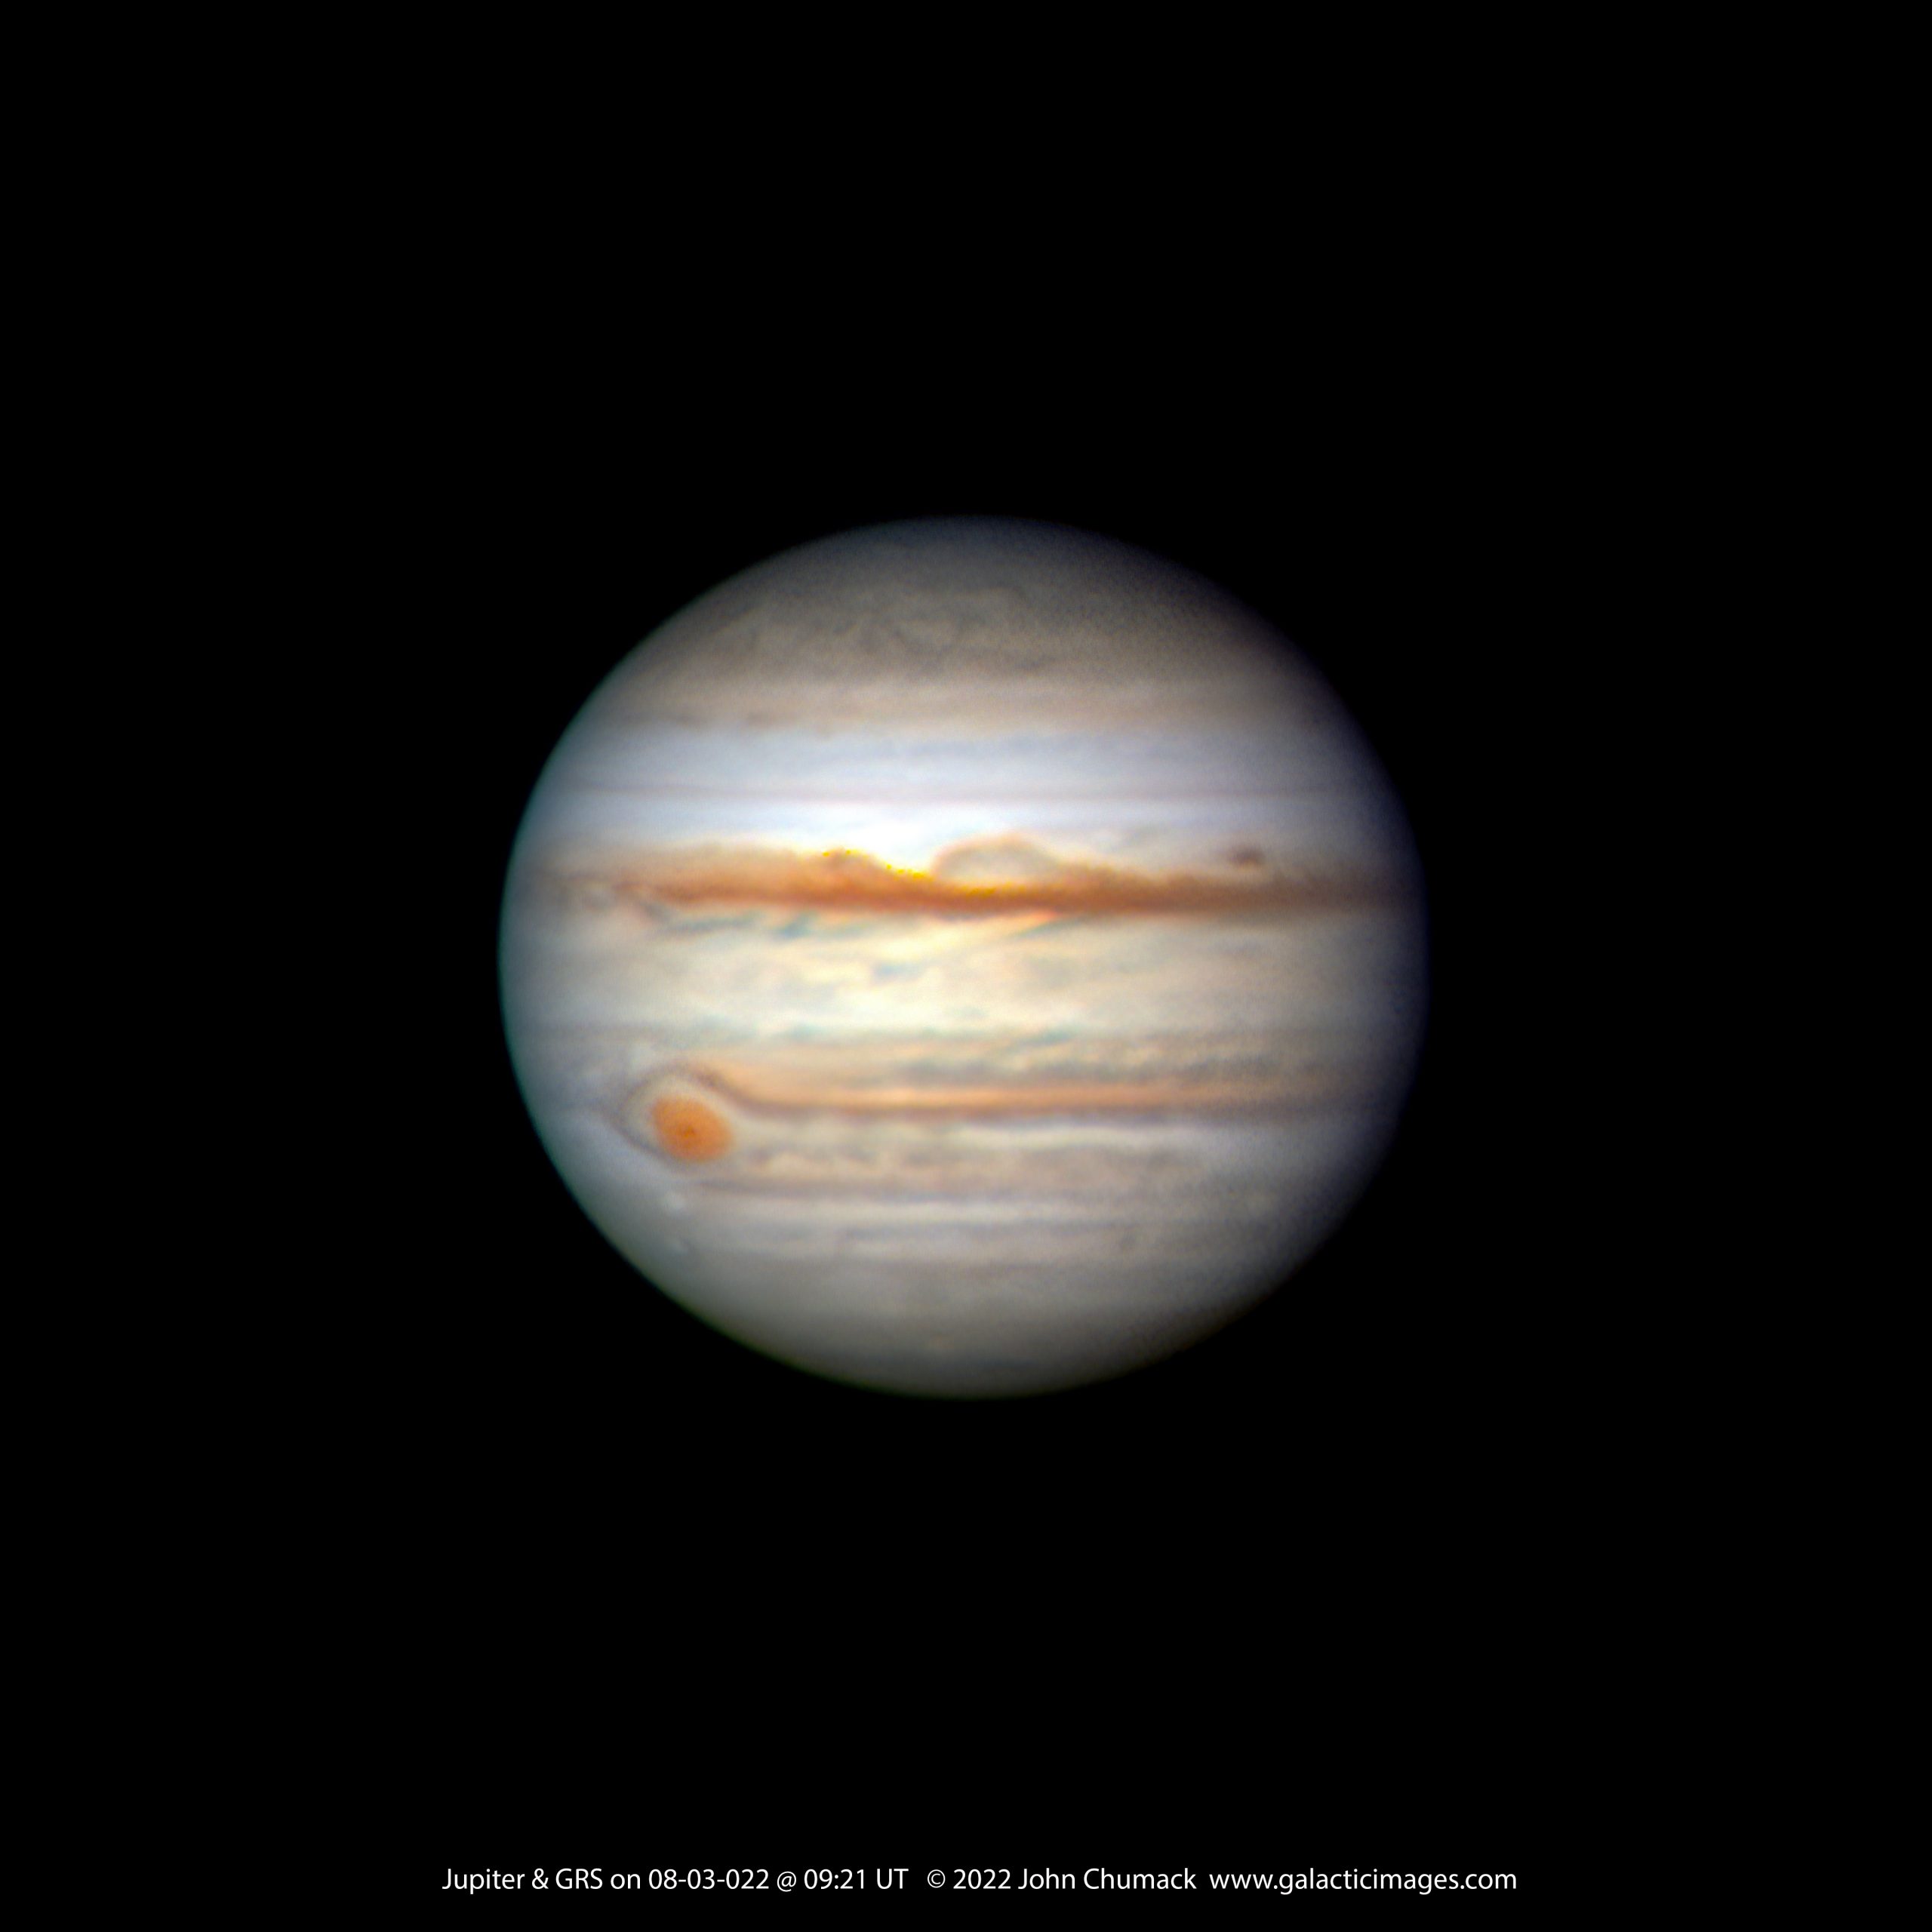 Jupiter and The Great Red Spot on 08-03-2022 at 09:21 U.T.